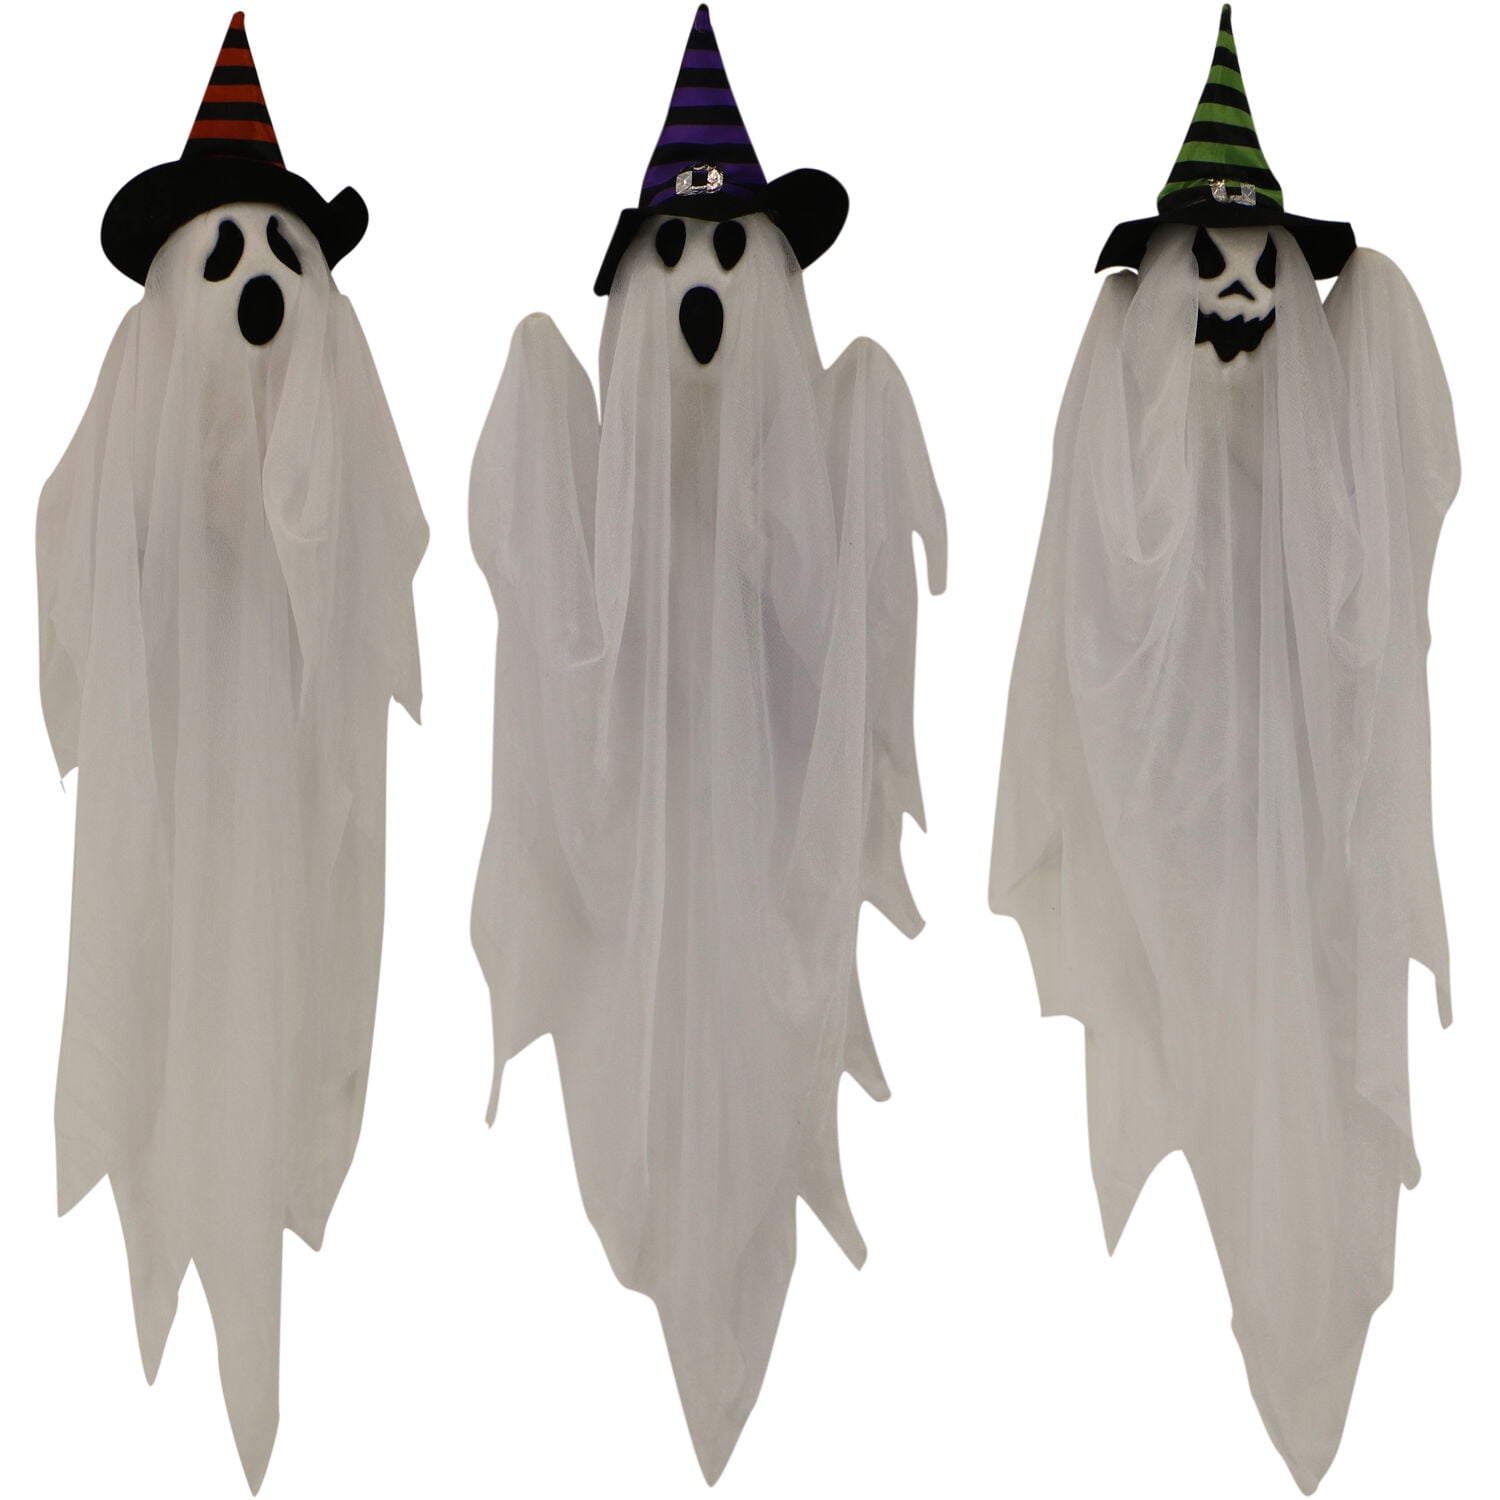 Light-Up White Haunted Hill Farm Lawn Ghosts HHGHST-1STL Halloween Decoration Hanging Option Color 3 Outdoor 